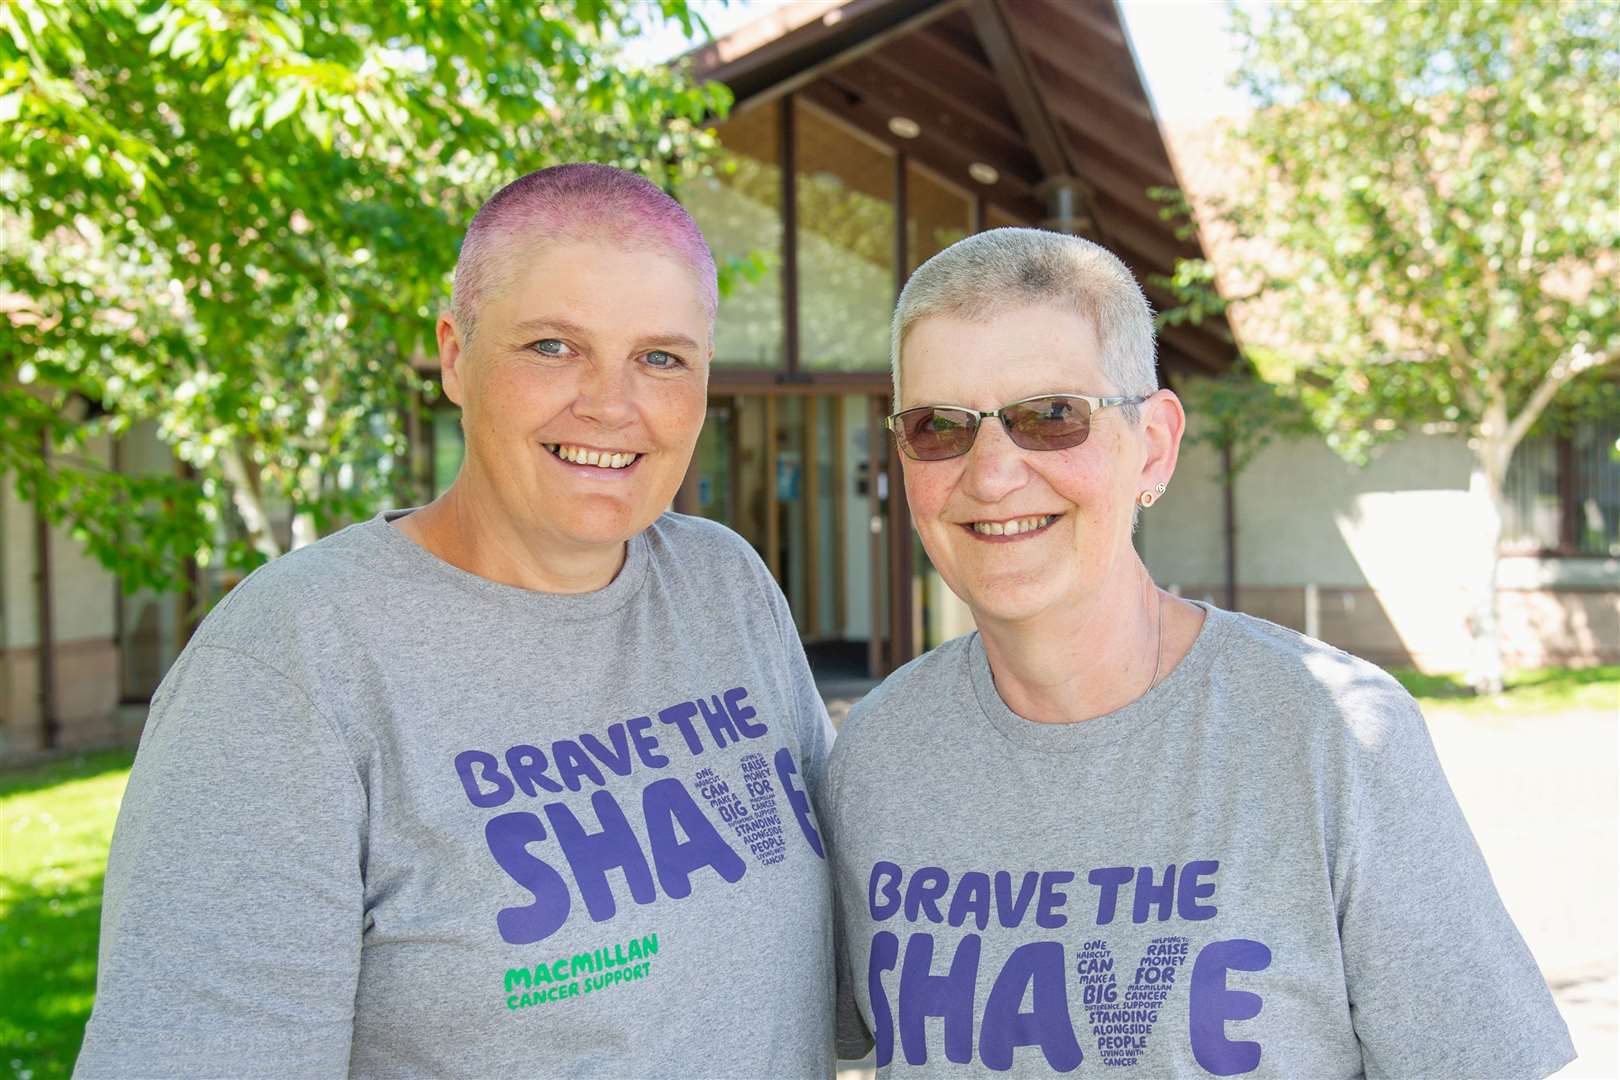 All smiles after raising more than £4300 by braving the shave for Macmillan Cancer Support are Margaret-Ann Mitchell (left) and Joyce Geddes. Picture: Daniel Forsyth. Image No.044538.